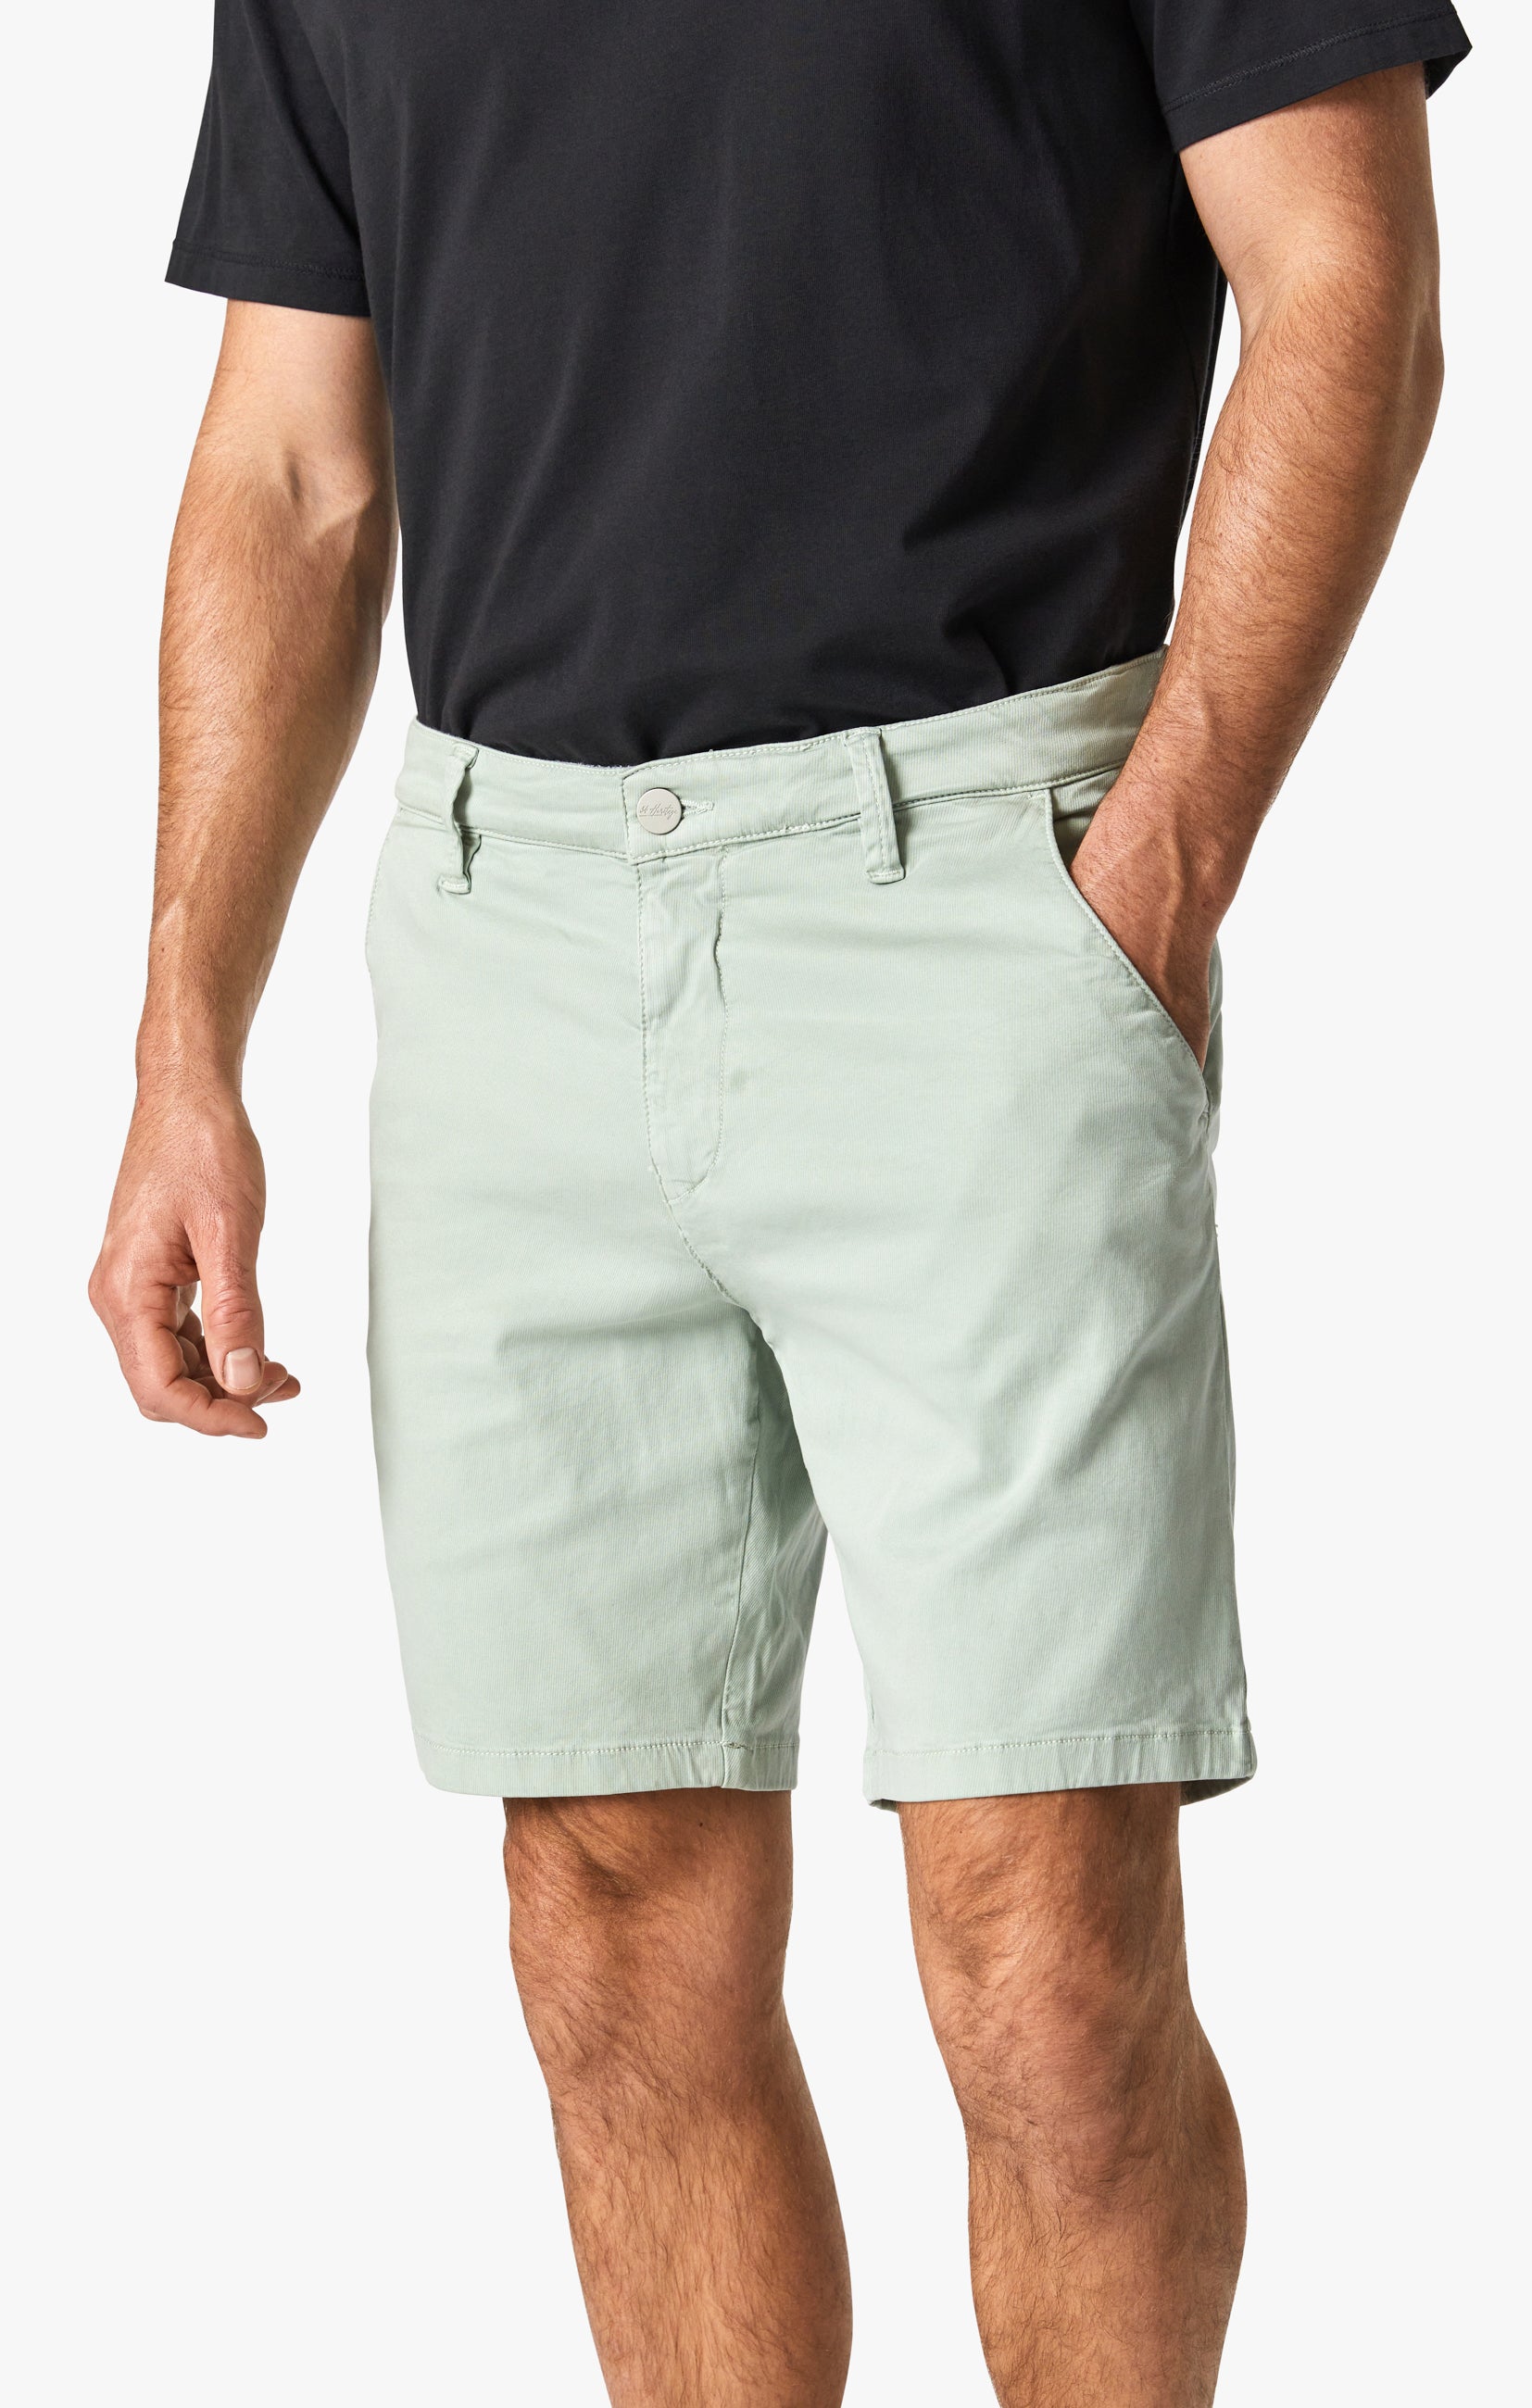 Arizona Shorts In Mint Soft Touch